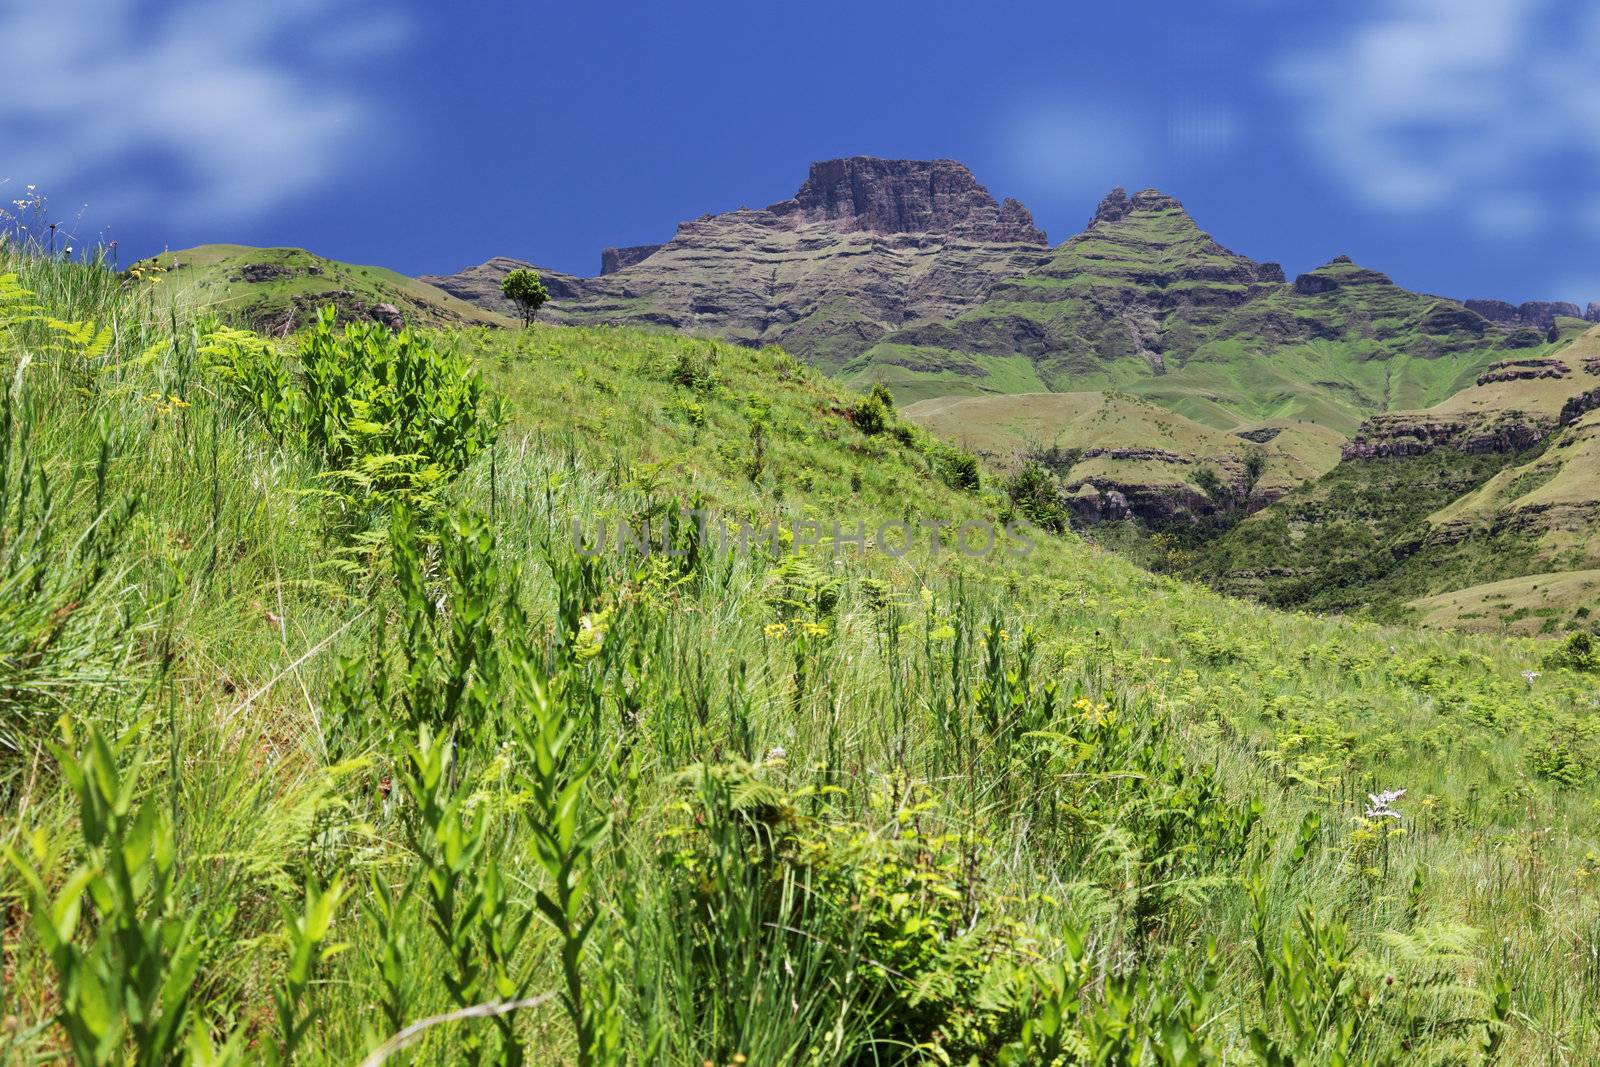 View across a lush green hillside of a mountain landscape with deep valleys and distant mountain peaks